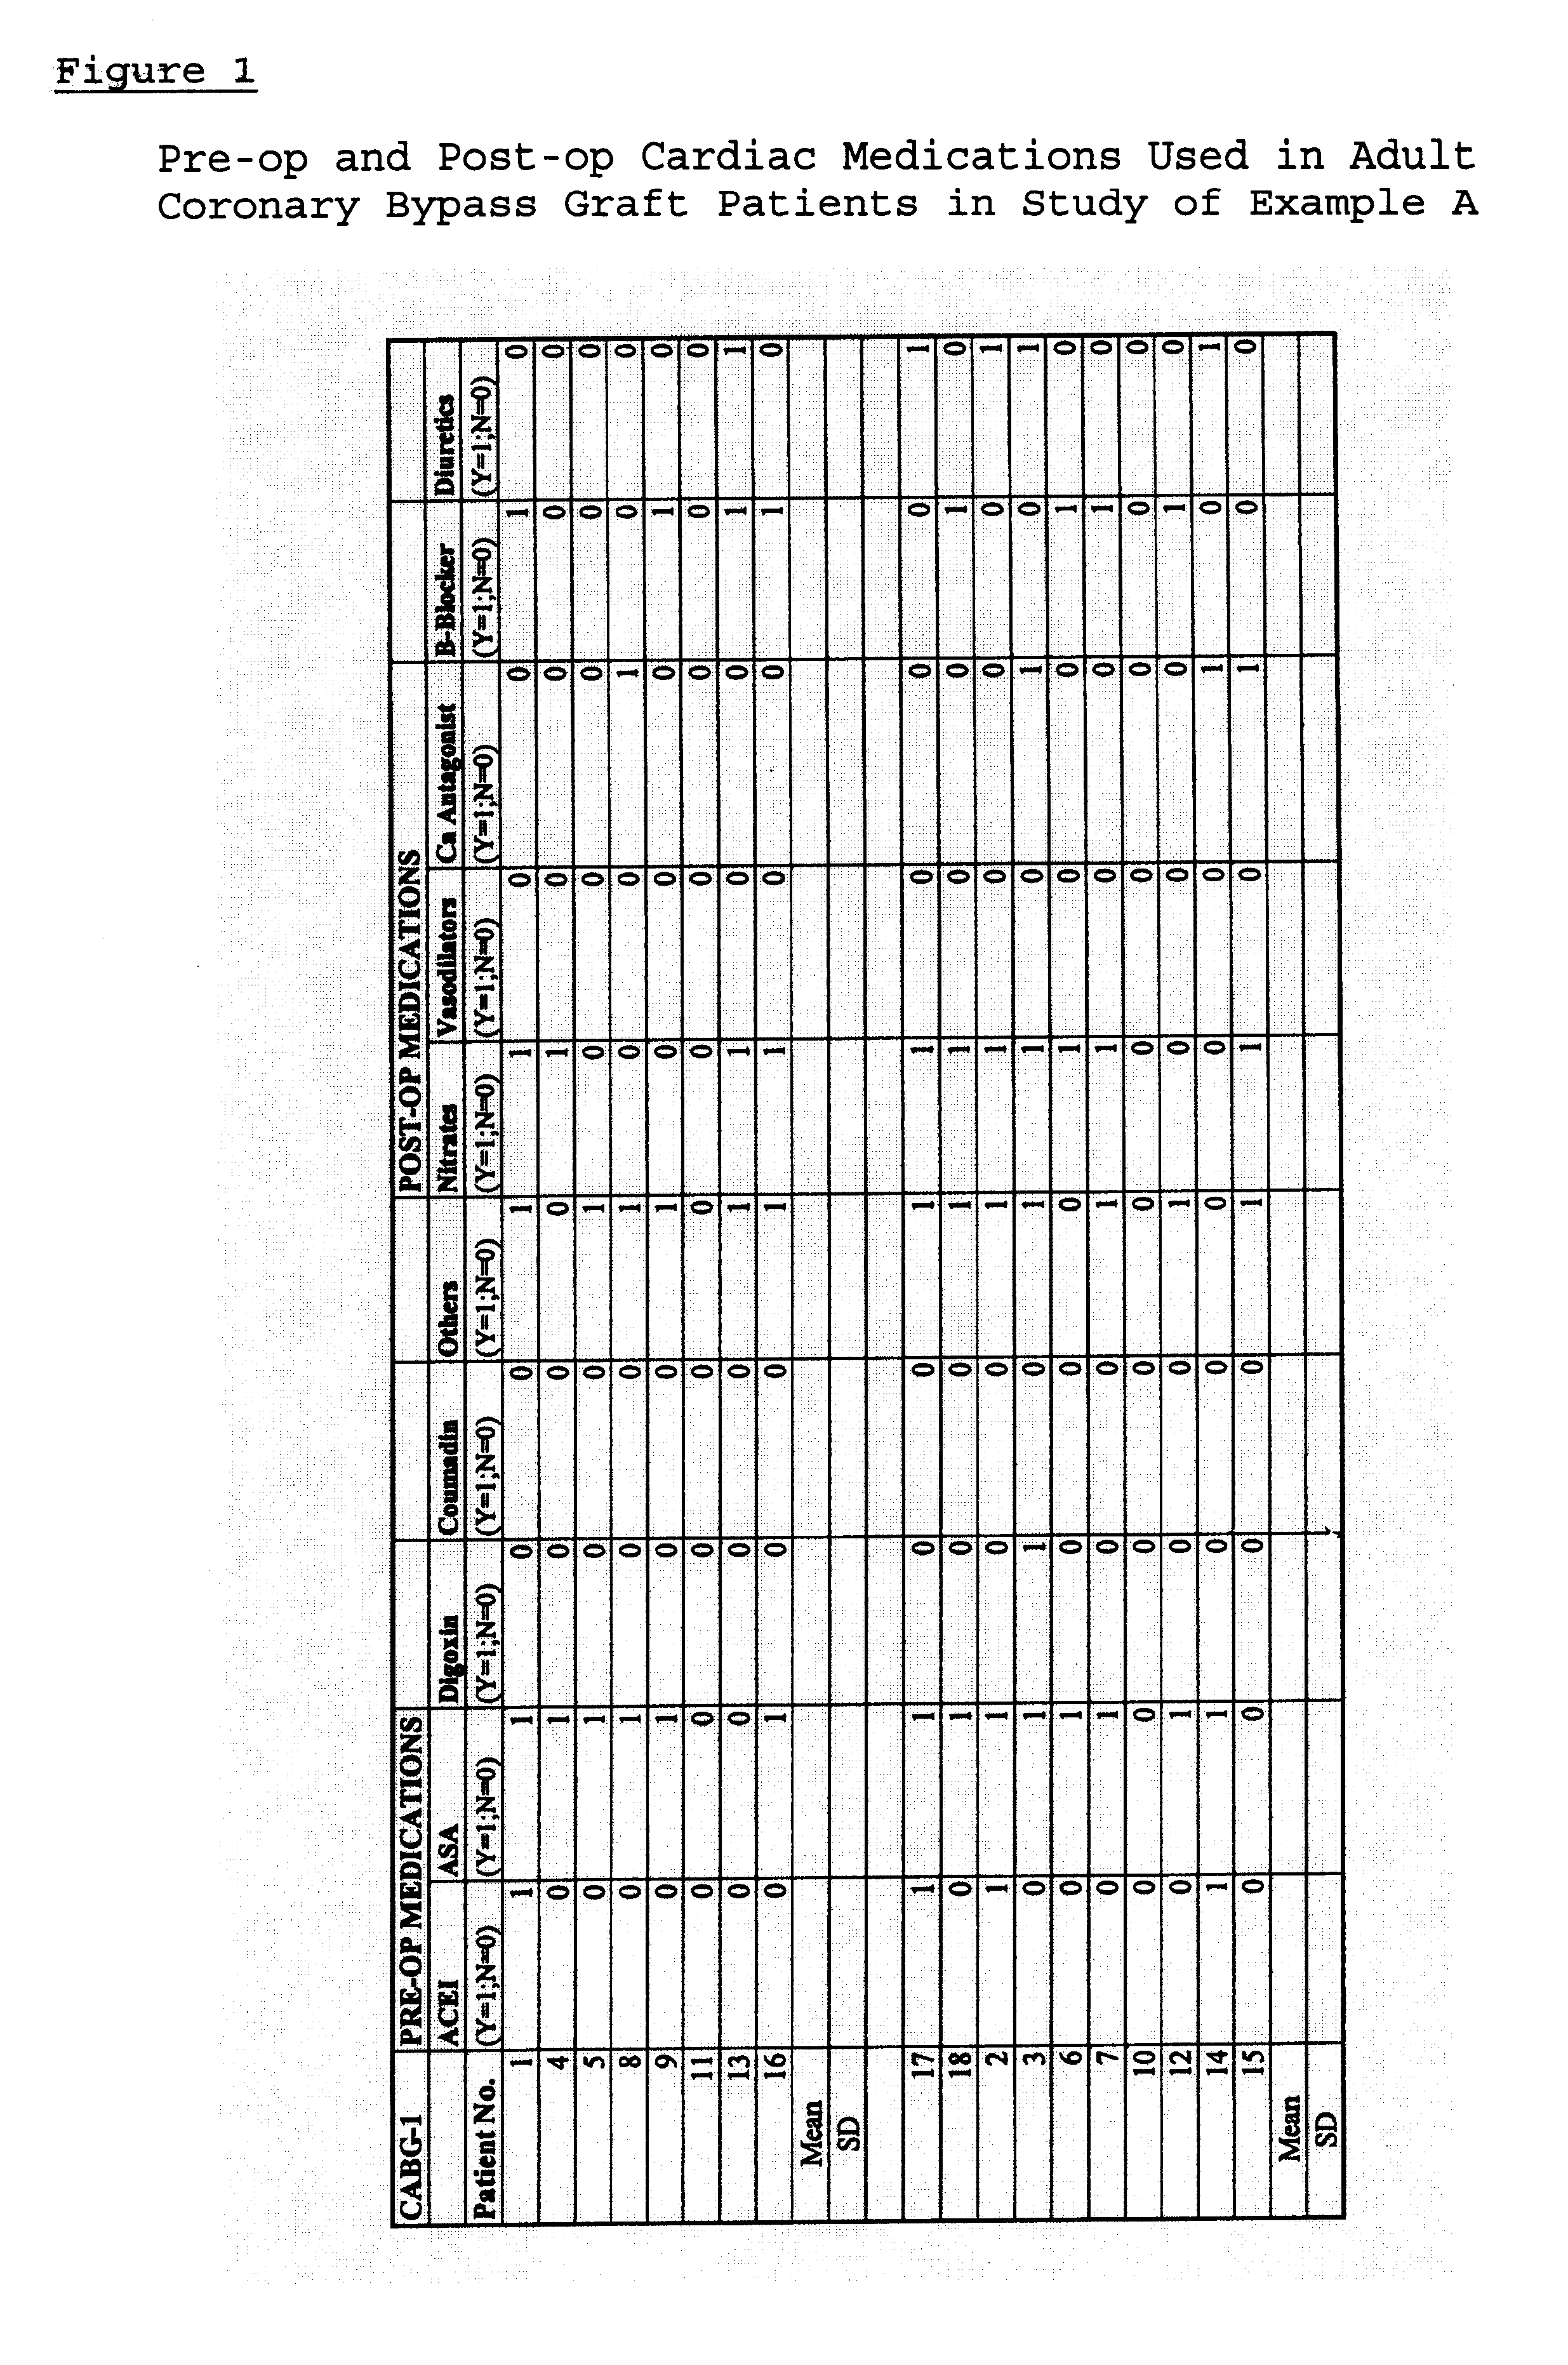 Methods of cardioprotection using dichloroacetate in combination with an inotrope